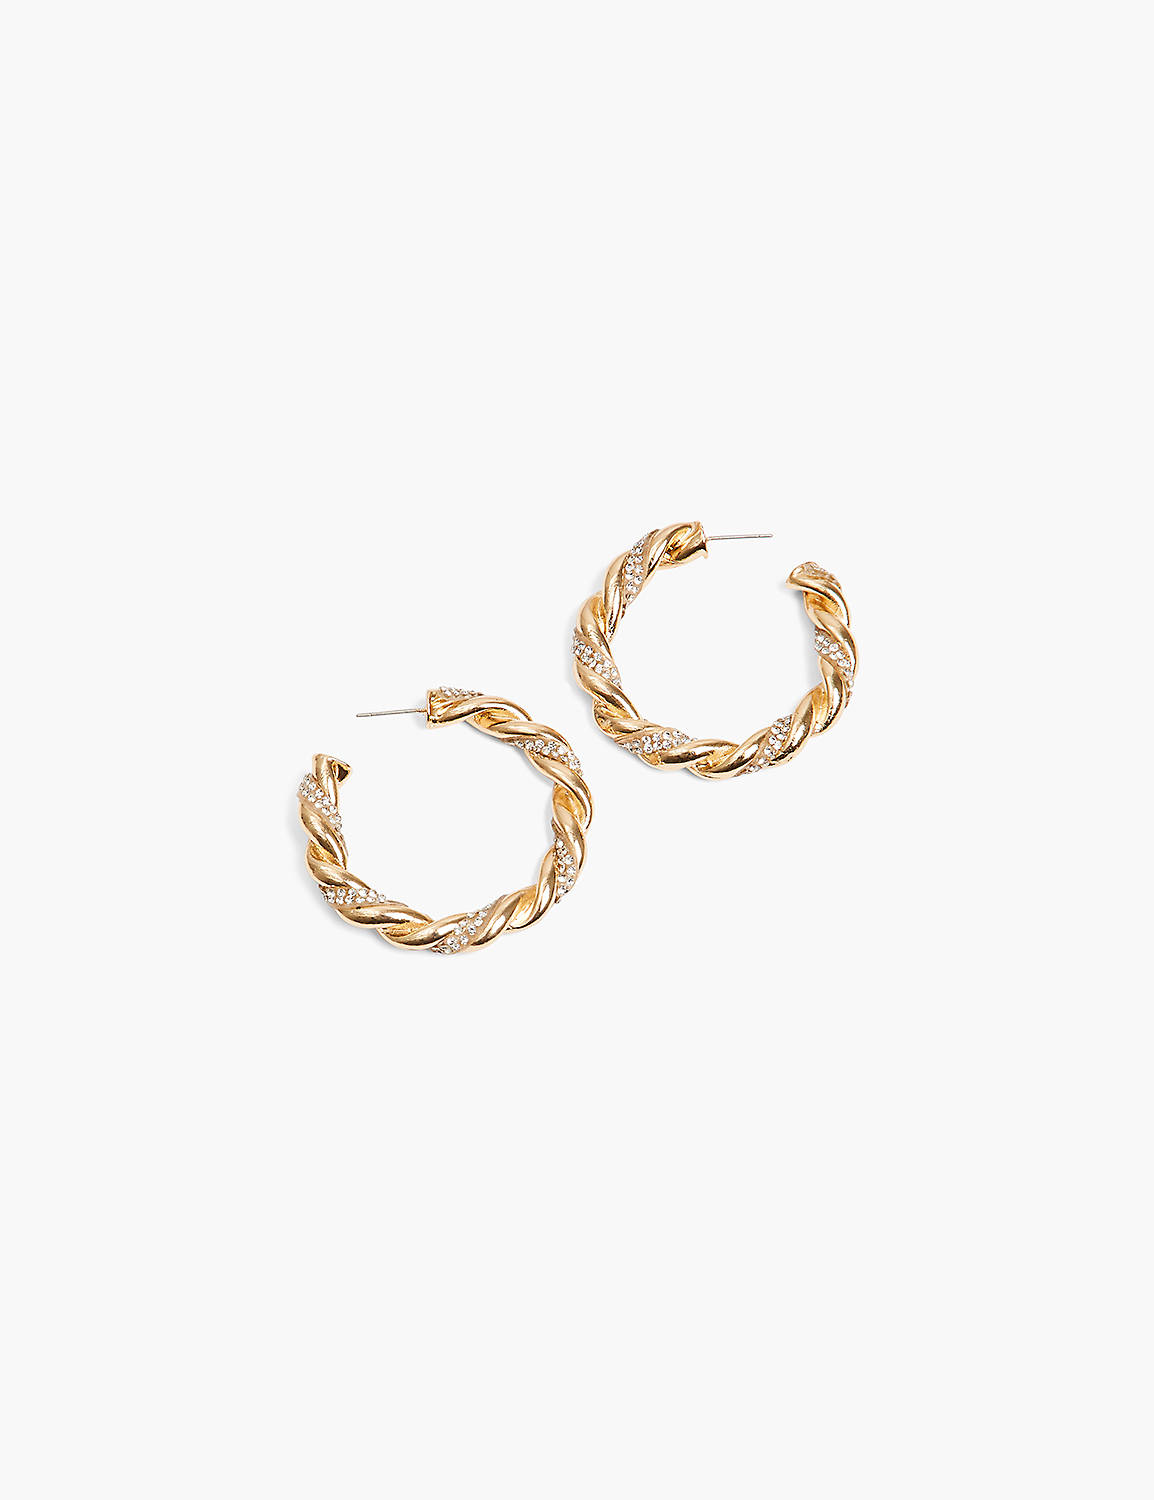 Pave Twisted Hoop Earrings Product Image 1